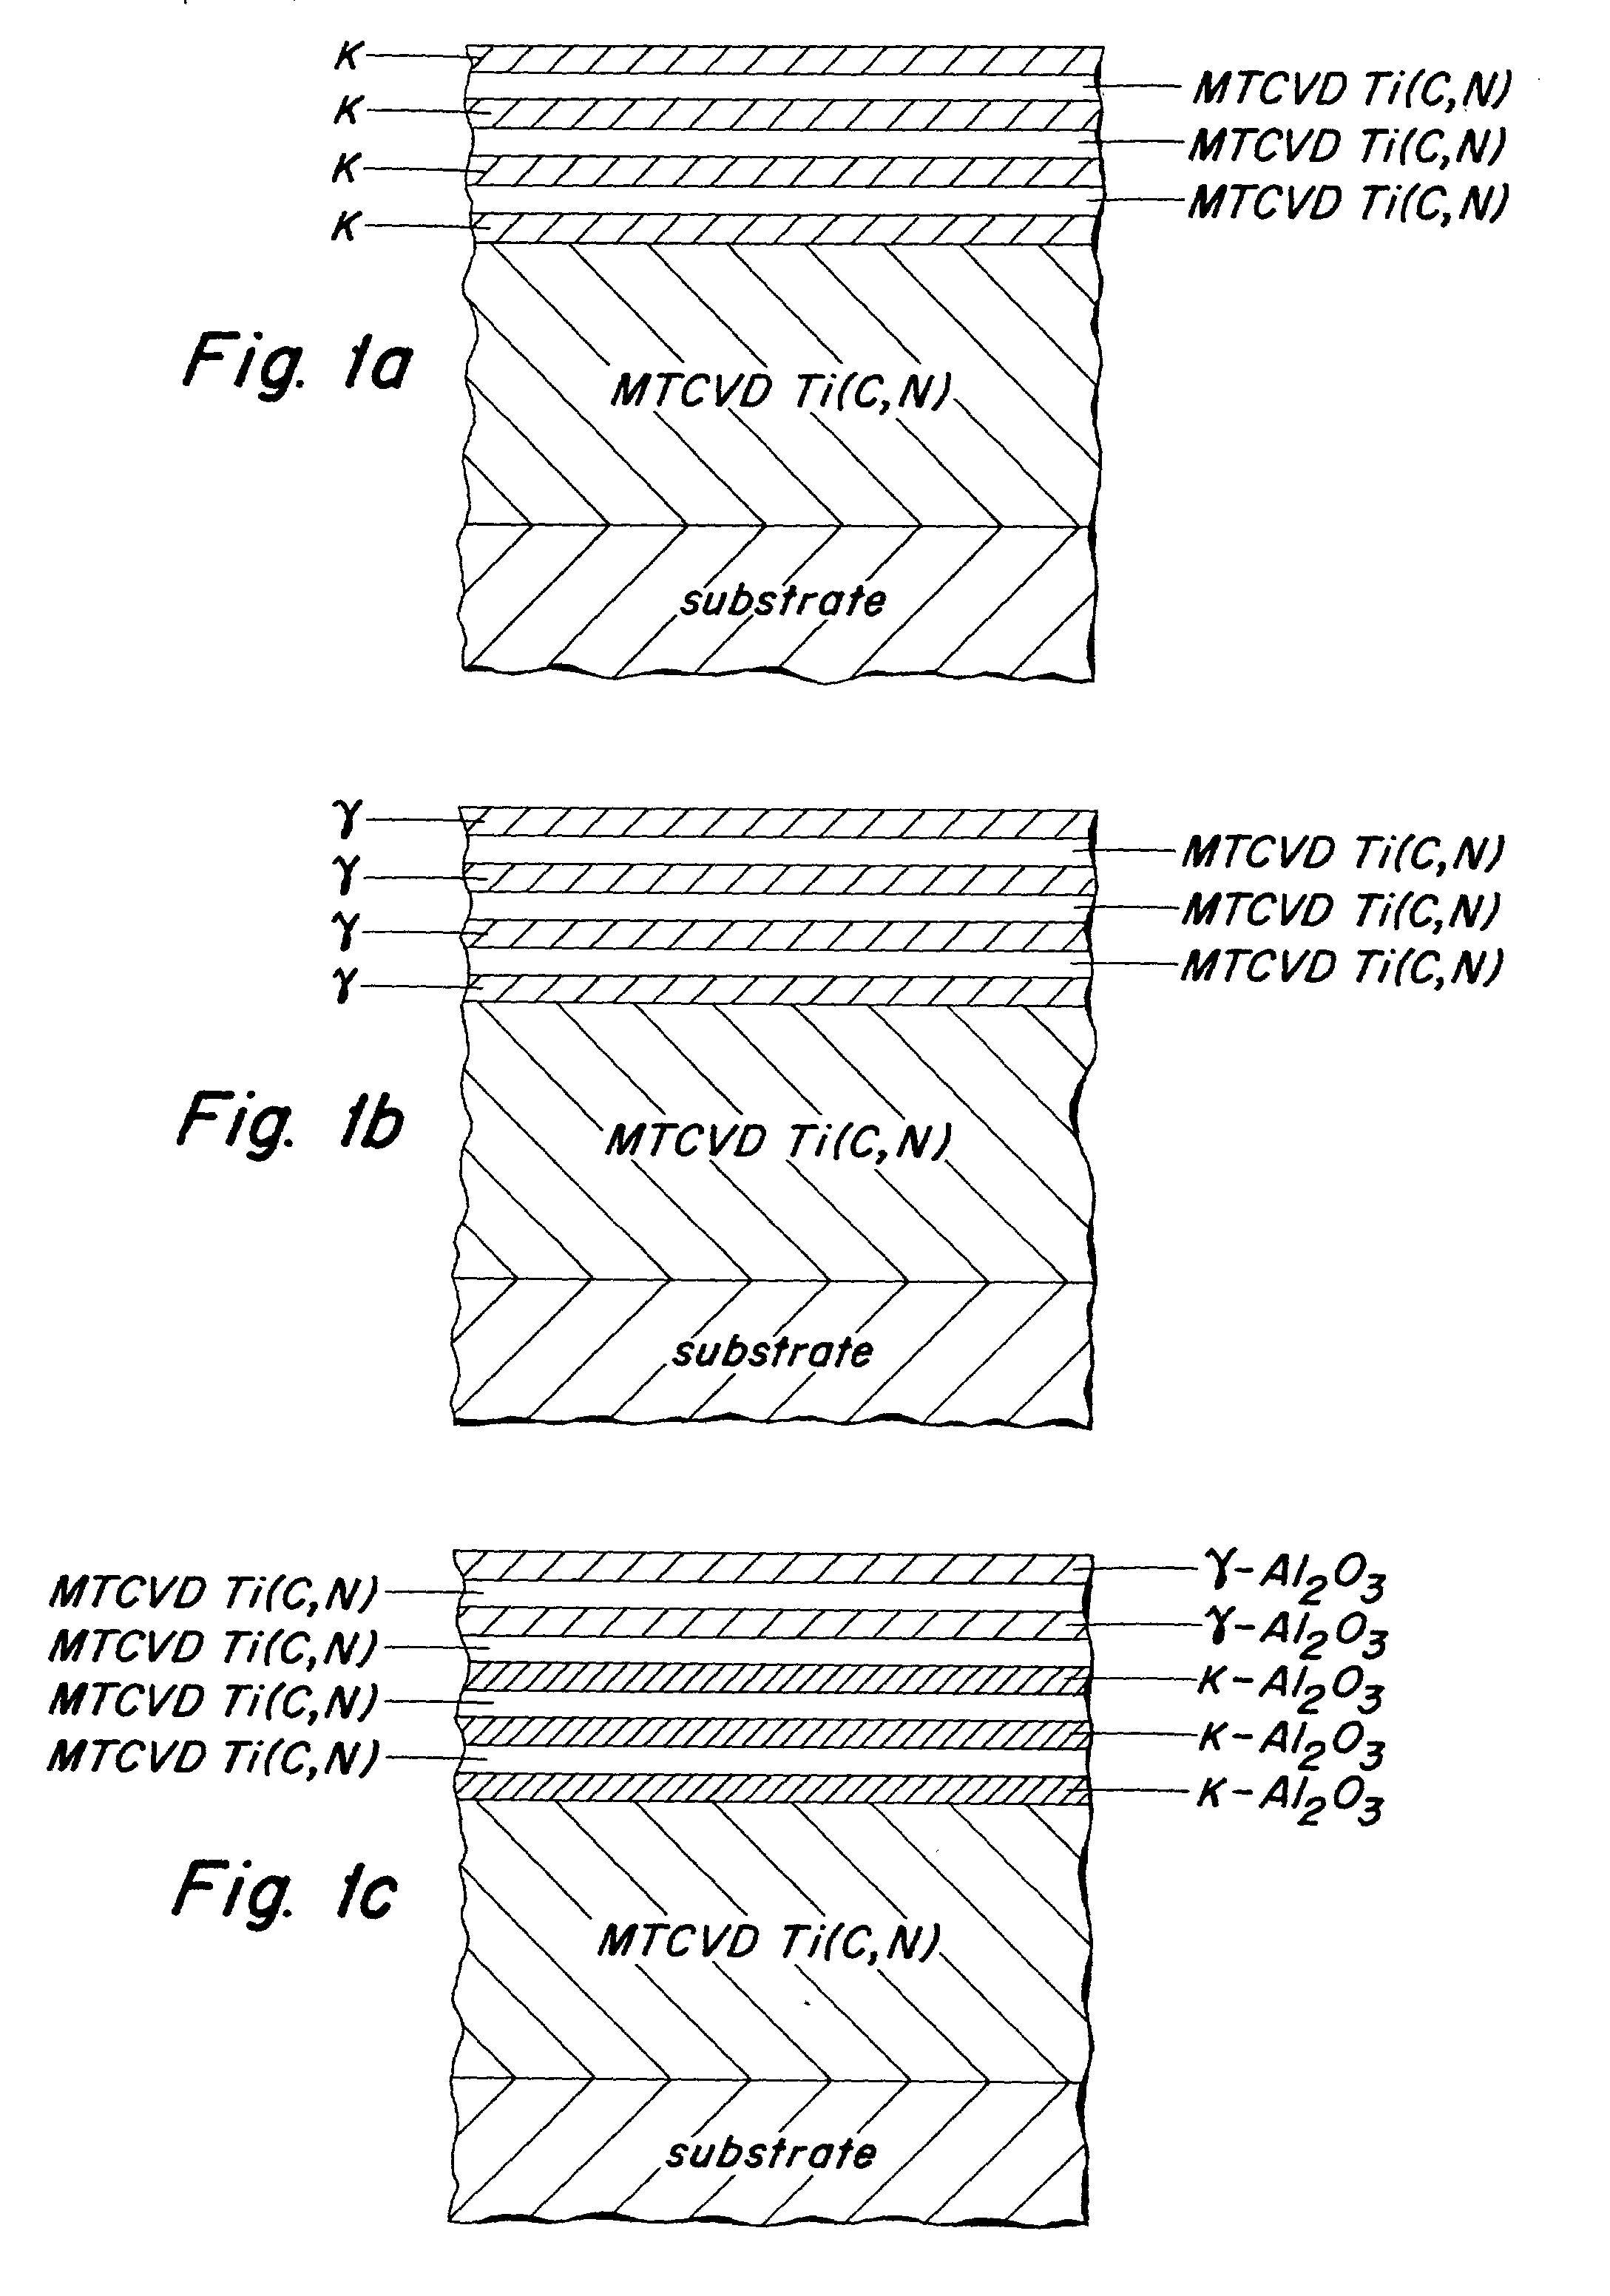 Enhanced A12O3-Ti(C,N) multi-coating deposited at low temperature